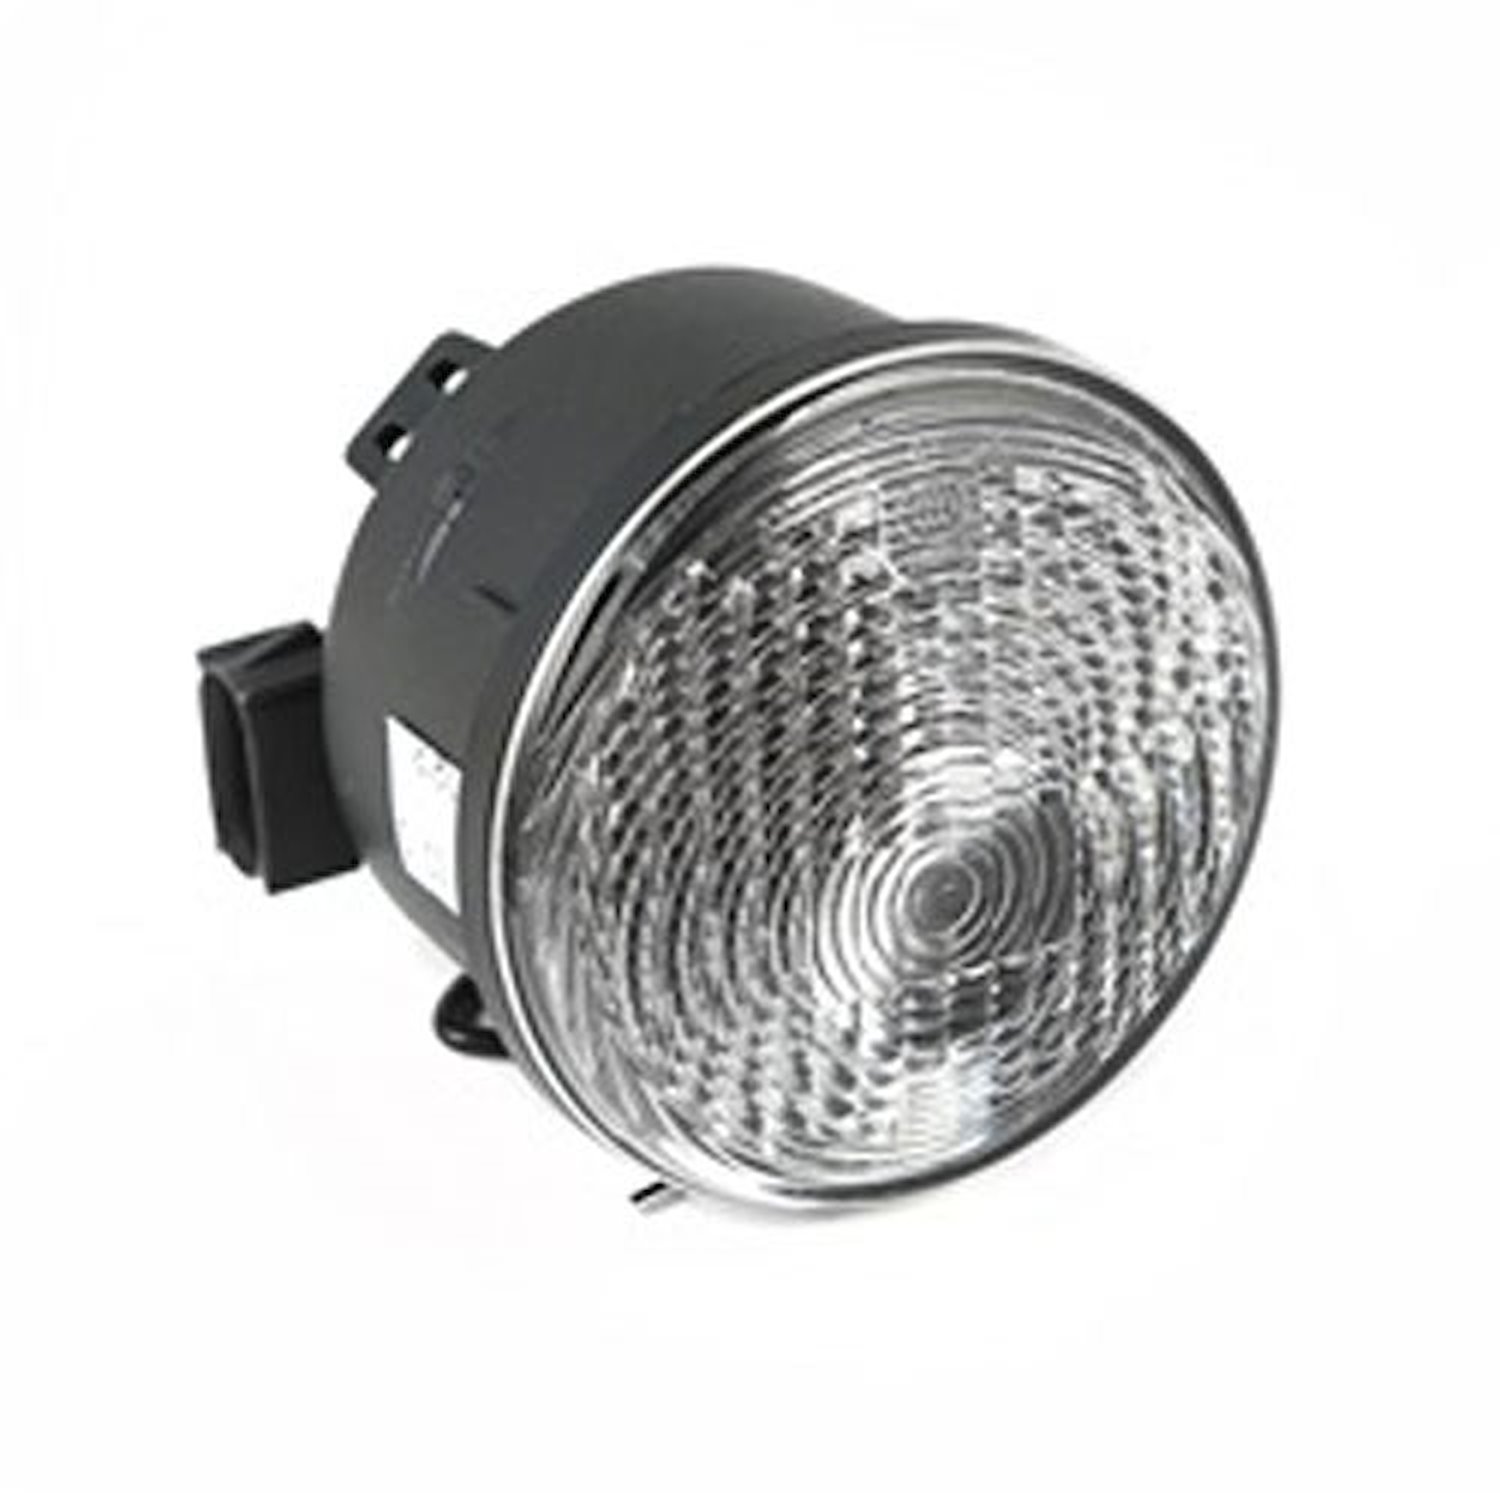 This right parking lamp assembly from Omix-ADA has a clear lens and bulb. Fits 07-16 Jeep Wranglers.